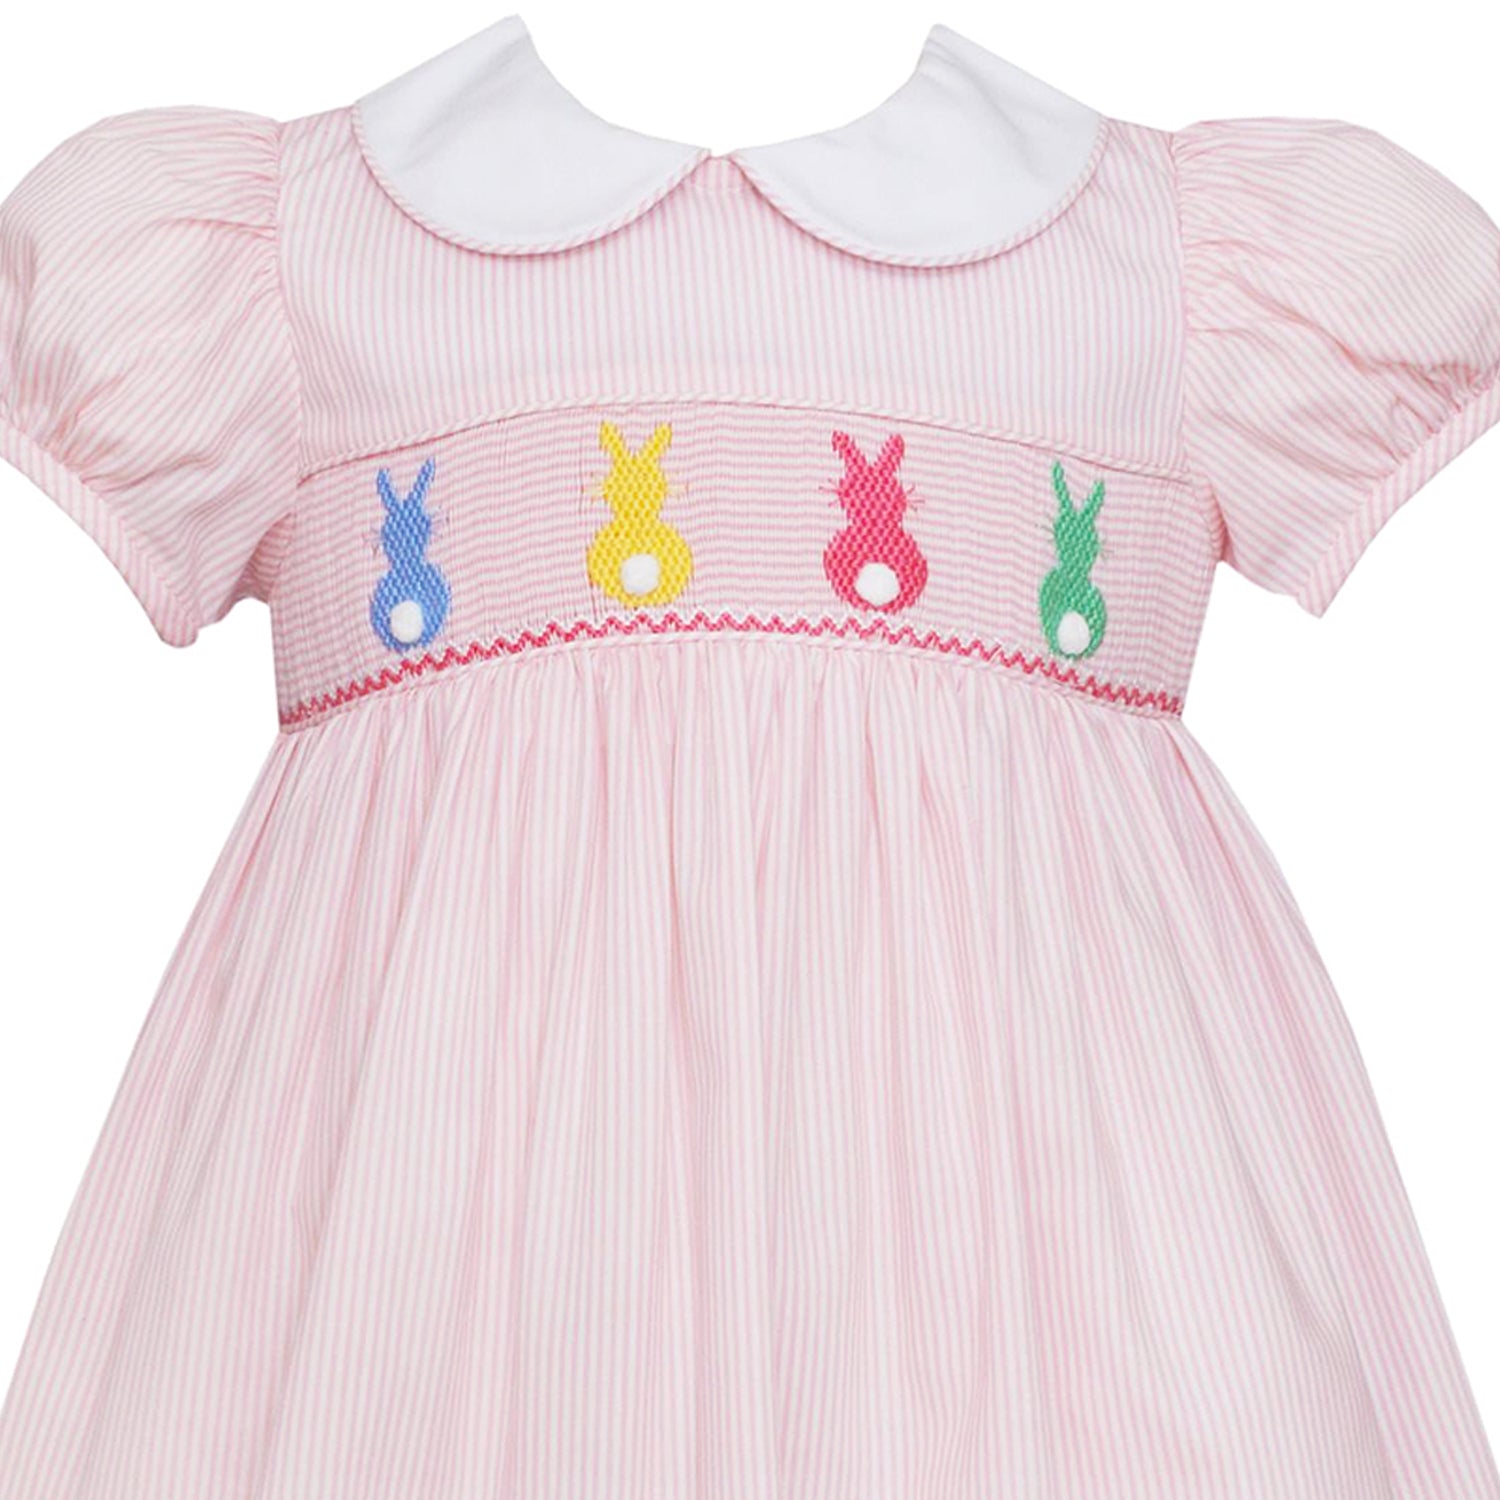 Light Pink Cottontails Smocked Dress w/ Collar